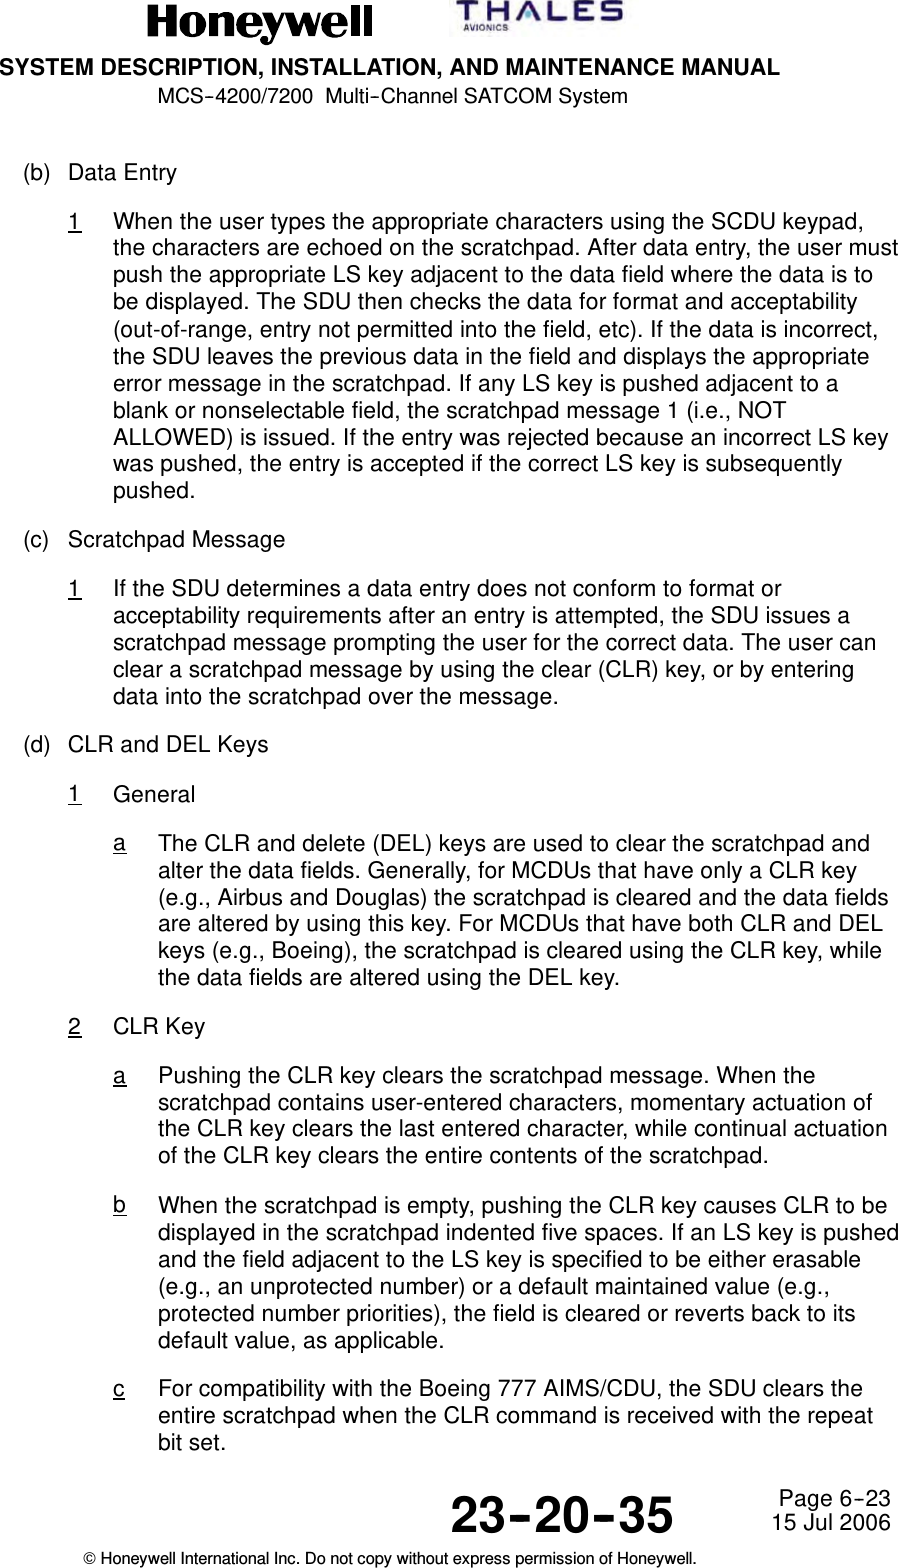 SYSTEM DESCRIPTION, INSTALLATION, AND MAINTENANCE MANUALMCS--4200/7200 Multi--Channel SATCOM System23--20--35 15 Jul 2006Honeywell International Inc. Do not copy without express permission of Honeywell.Page 6--23(b) Data Entry1When the user types the appropriate characters using the SCDU keypad,the characters are echoed on the scratchpad. After data entry, the user mustpush the appropriate LS key adjacent to the data field where the data is tobe displayed. The SDU then checks the data for format and acceptability(out-of-range, entry not permitted into the field, etc). If the data is incorrect,the SDU leaves the previous data in the field and displays the appropriateerror message in the scratchpad. If any LS key is pushed adjacent to ablank or nonselectable field, the scratchpad message 1 (i.e., NOTALLOWED) is issued. If the entry was rejected because an incorrect LS keywas pushed, the entry is accepted if the correct LS key is subsequentlypushed.(c) Scratchpad Message1If the SDU determines a data entry does not conform to format oracceptability requirements after an entry is attempted, the SDU issues ascratchpad message prompting the user for the correct data. The user canclear a scratchpad message by using the clear (CLR) key, or by enteringdata into the scratchpad over the message.(d) CLR and DEL Keys1GeneralaThe CLR and delete (DEL) keys are used to clear the scratchpad andalter the data fields. Generally, for MCDUs that have only a CLR key(e.g., Airbus and Douglas) the scratchpad is cleared and the data fieldsare altered by using this key. For MCDUs that have both CLR and DELkeys (e.g., Boeing), the scratchpad is cleared using the CLR key, whilethe data fields are altered using the DEL key.2CLR KeyaPushing the CLR key clears the scratchpad message. When thescratchpad contains user-entered characters, momentary actuation ofthe CLR key clears the last entered character, while continual actuationof the CLR key clears the entire contents of the scratchpad.bWhen the scratchpad is empty, pushing the CLR key causes CLR to bedisplayed in the scratchpad indented five spaces. If an LS key is pushedand the field adjacent to the LS key is specified to be either erasable(e.g., an unprotected number) or a default maintained value (e.g.,protected number priorities), the field is cleared or reverts back to itsdefault value, as applicable.cFor compatibility with the Boeing 777 AIMS/CDU, the SDU clears theentire scratchpad when the CLR command is received with the repeatbit set.